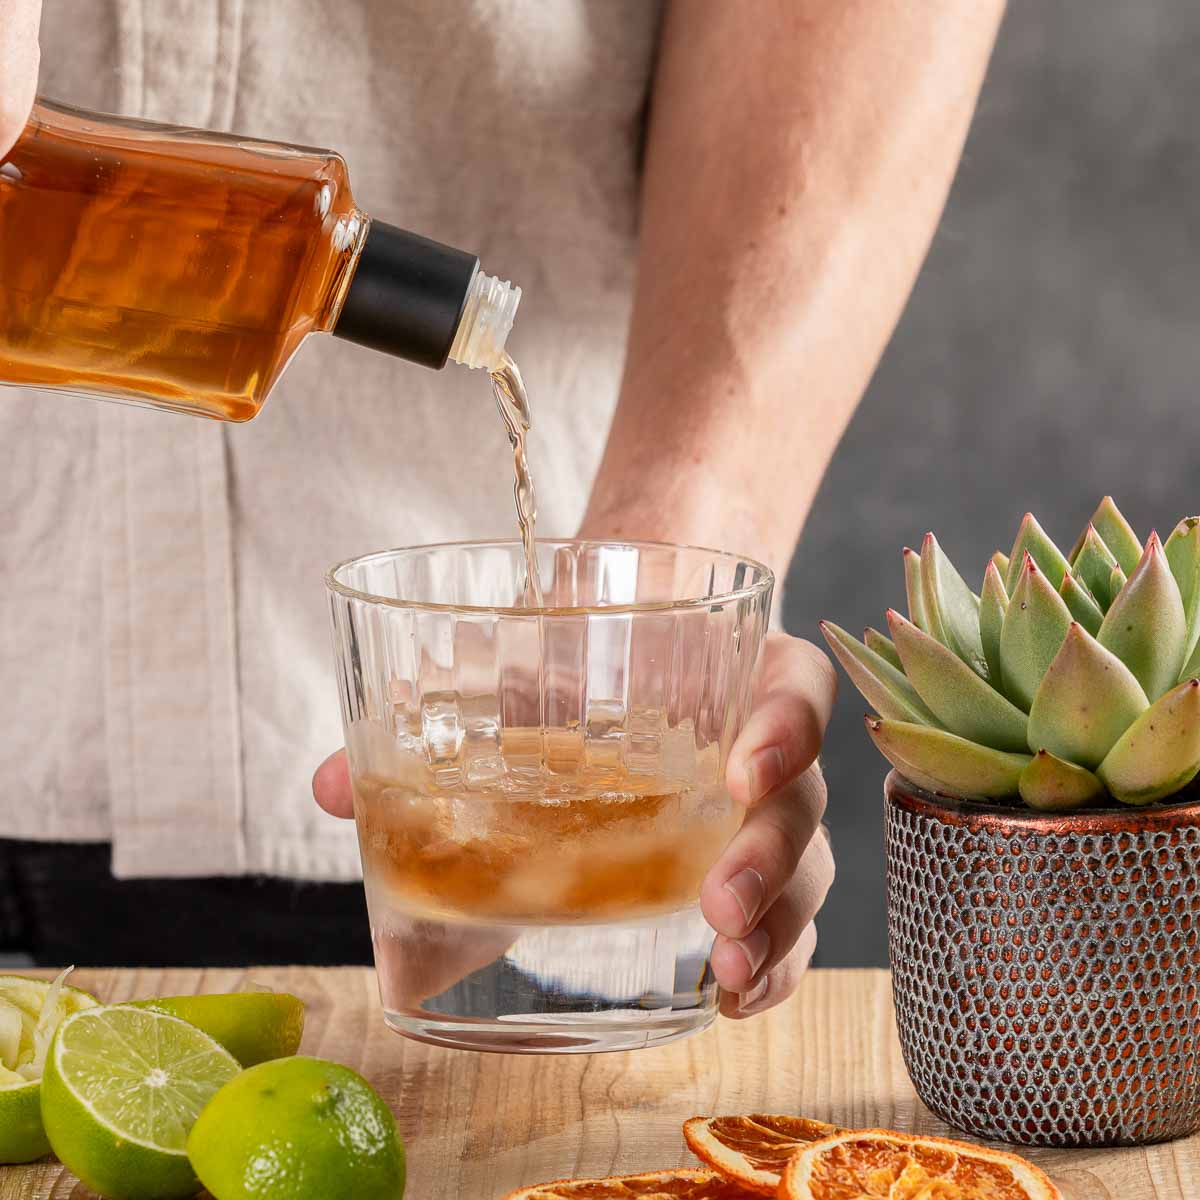 15 Great Bourbon Cocktail Recipes to Try Now